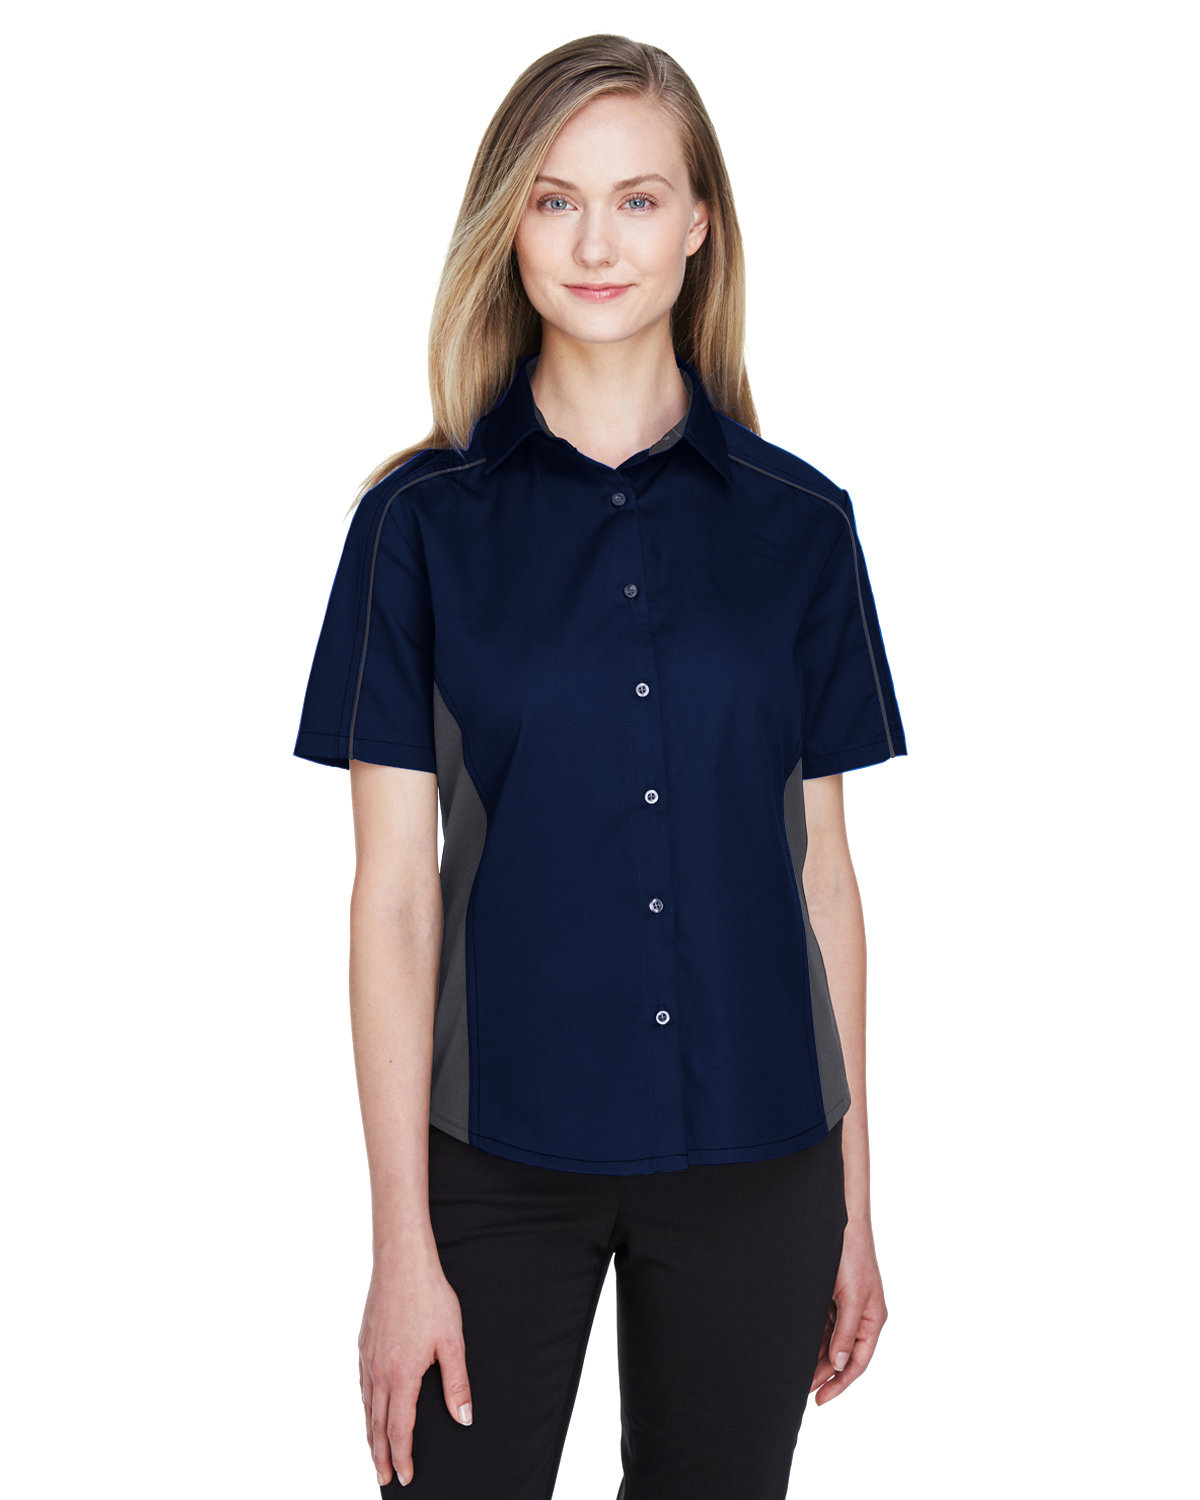 North End 77042 - Ladies' Fuse Colorblock Twill Shirt